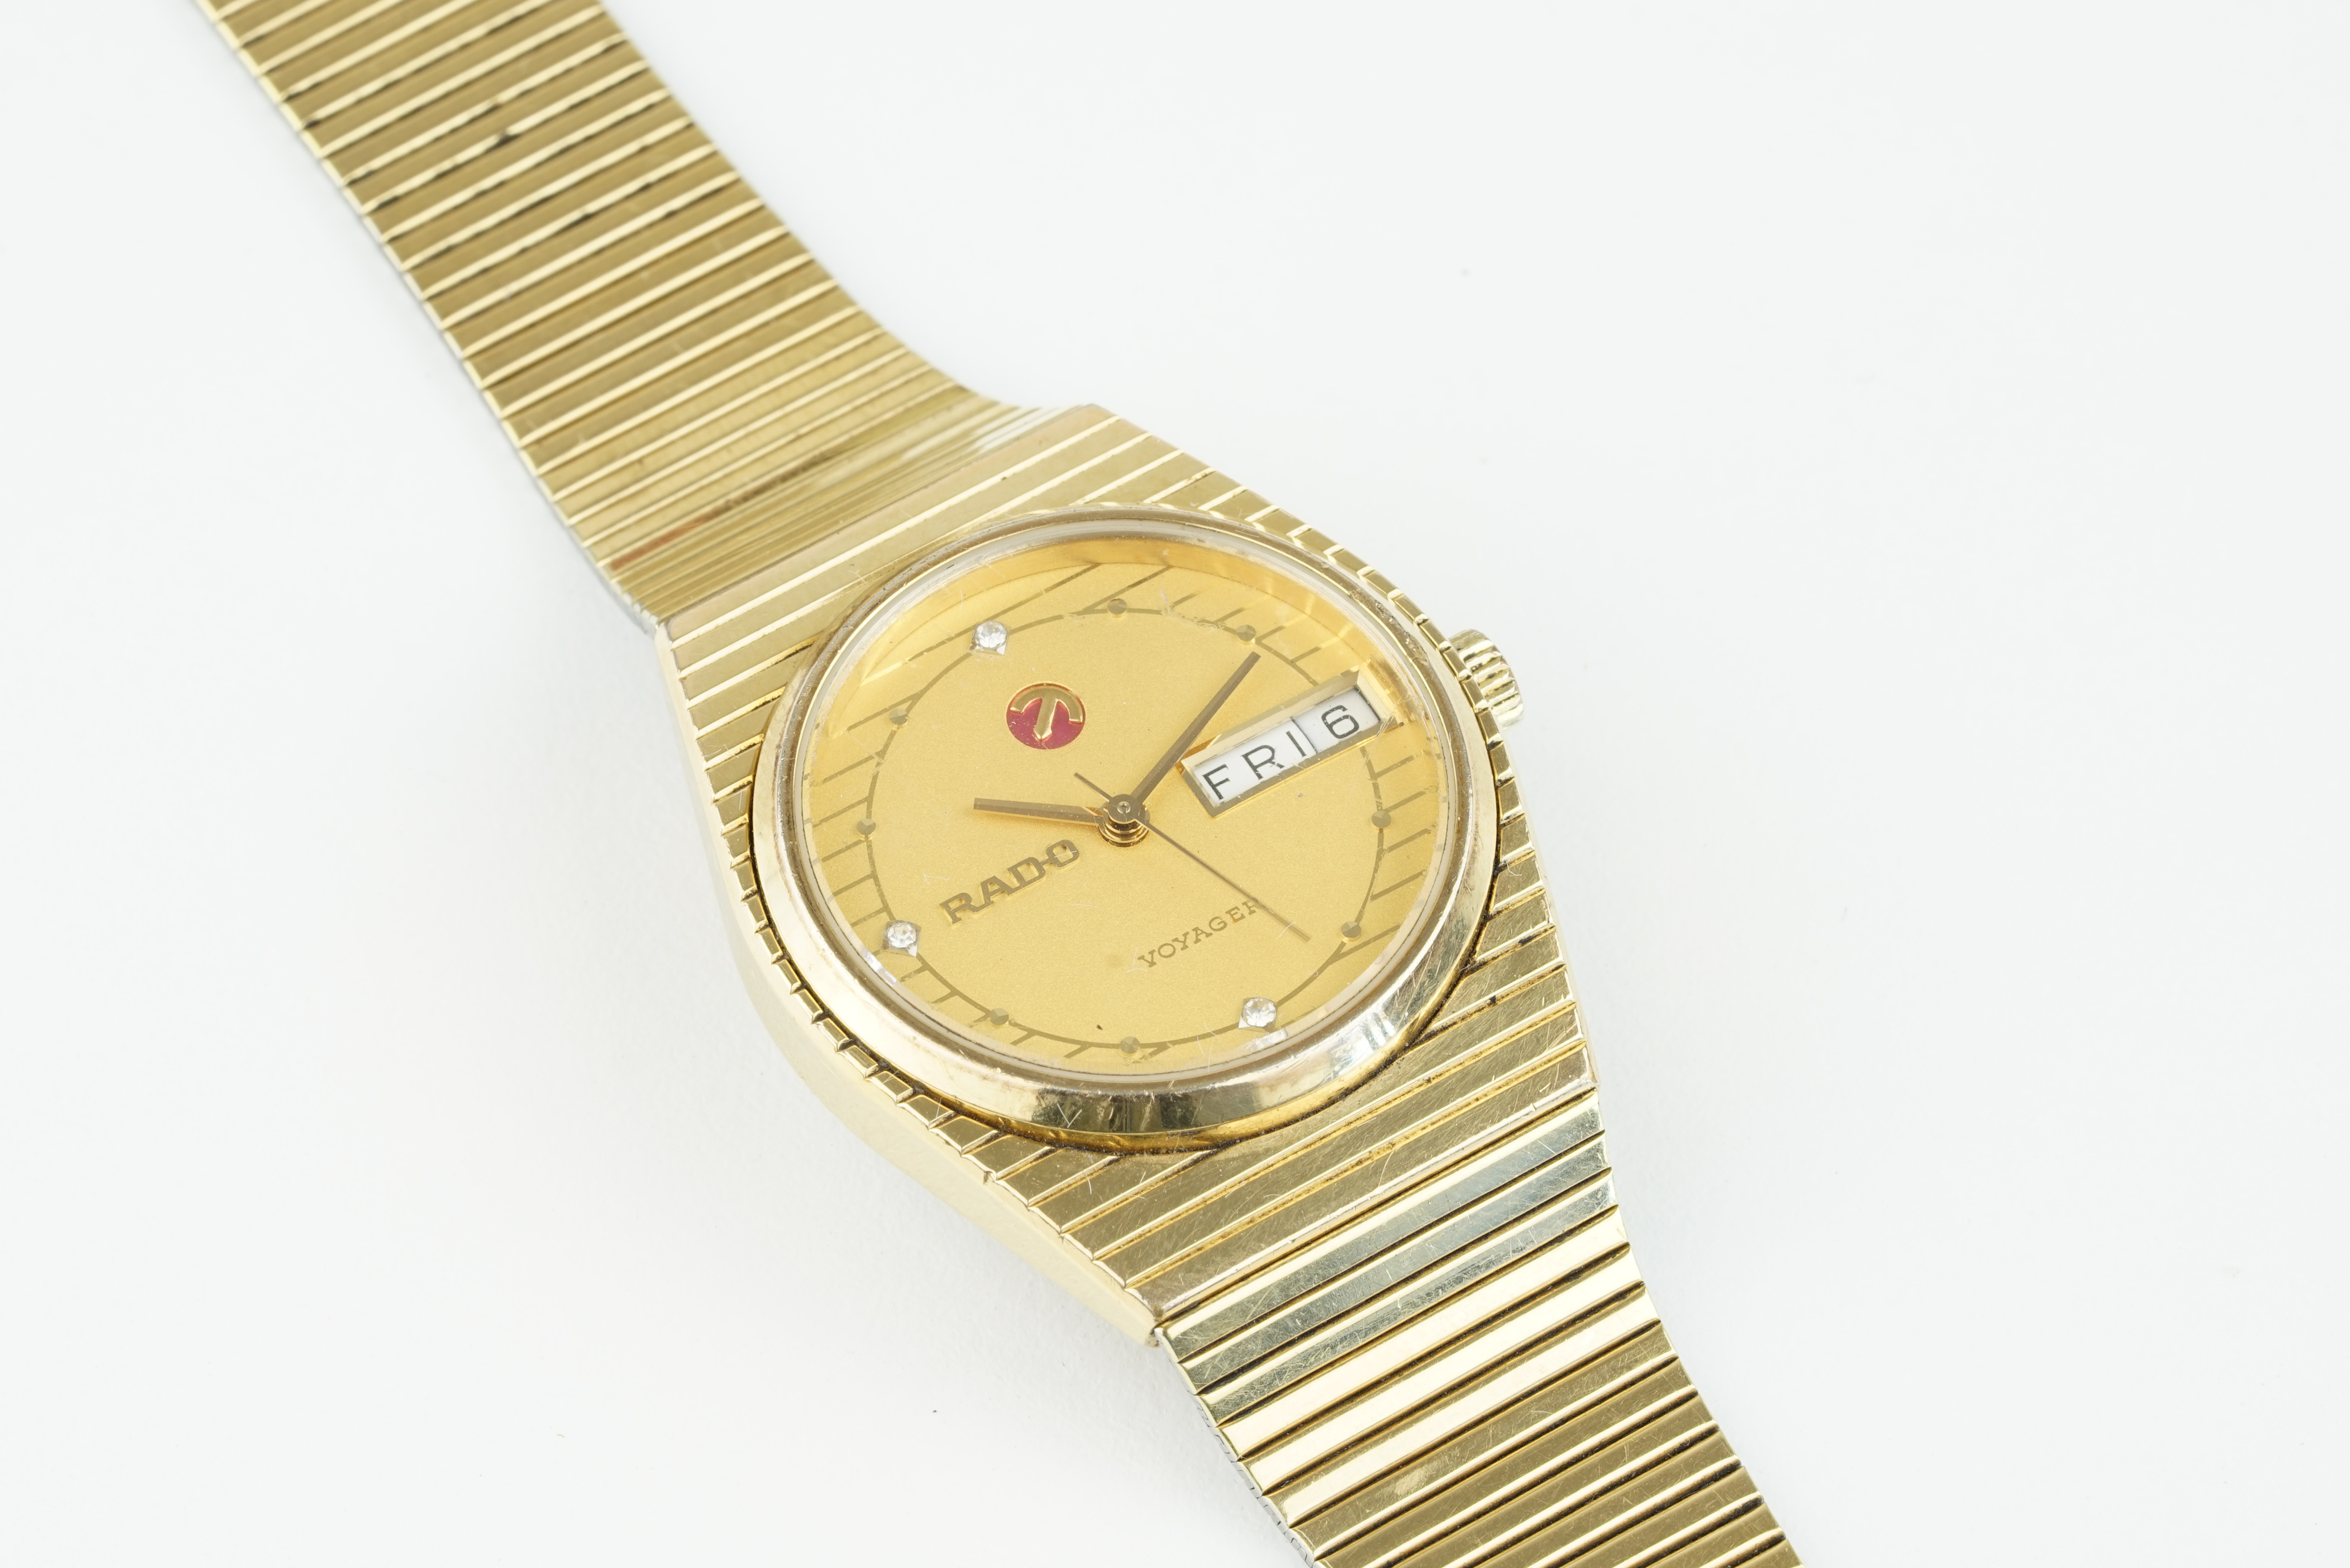 RADO VOYAGER DAY DATE WRISTWATCH, circular gold dial with hour markers and hands, day date window at